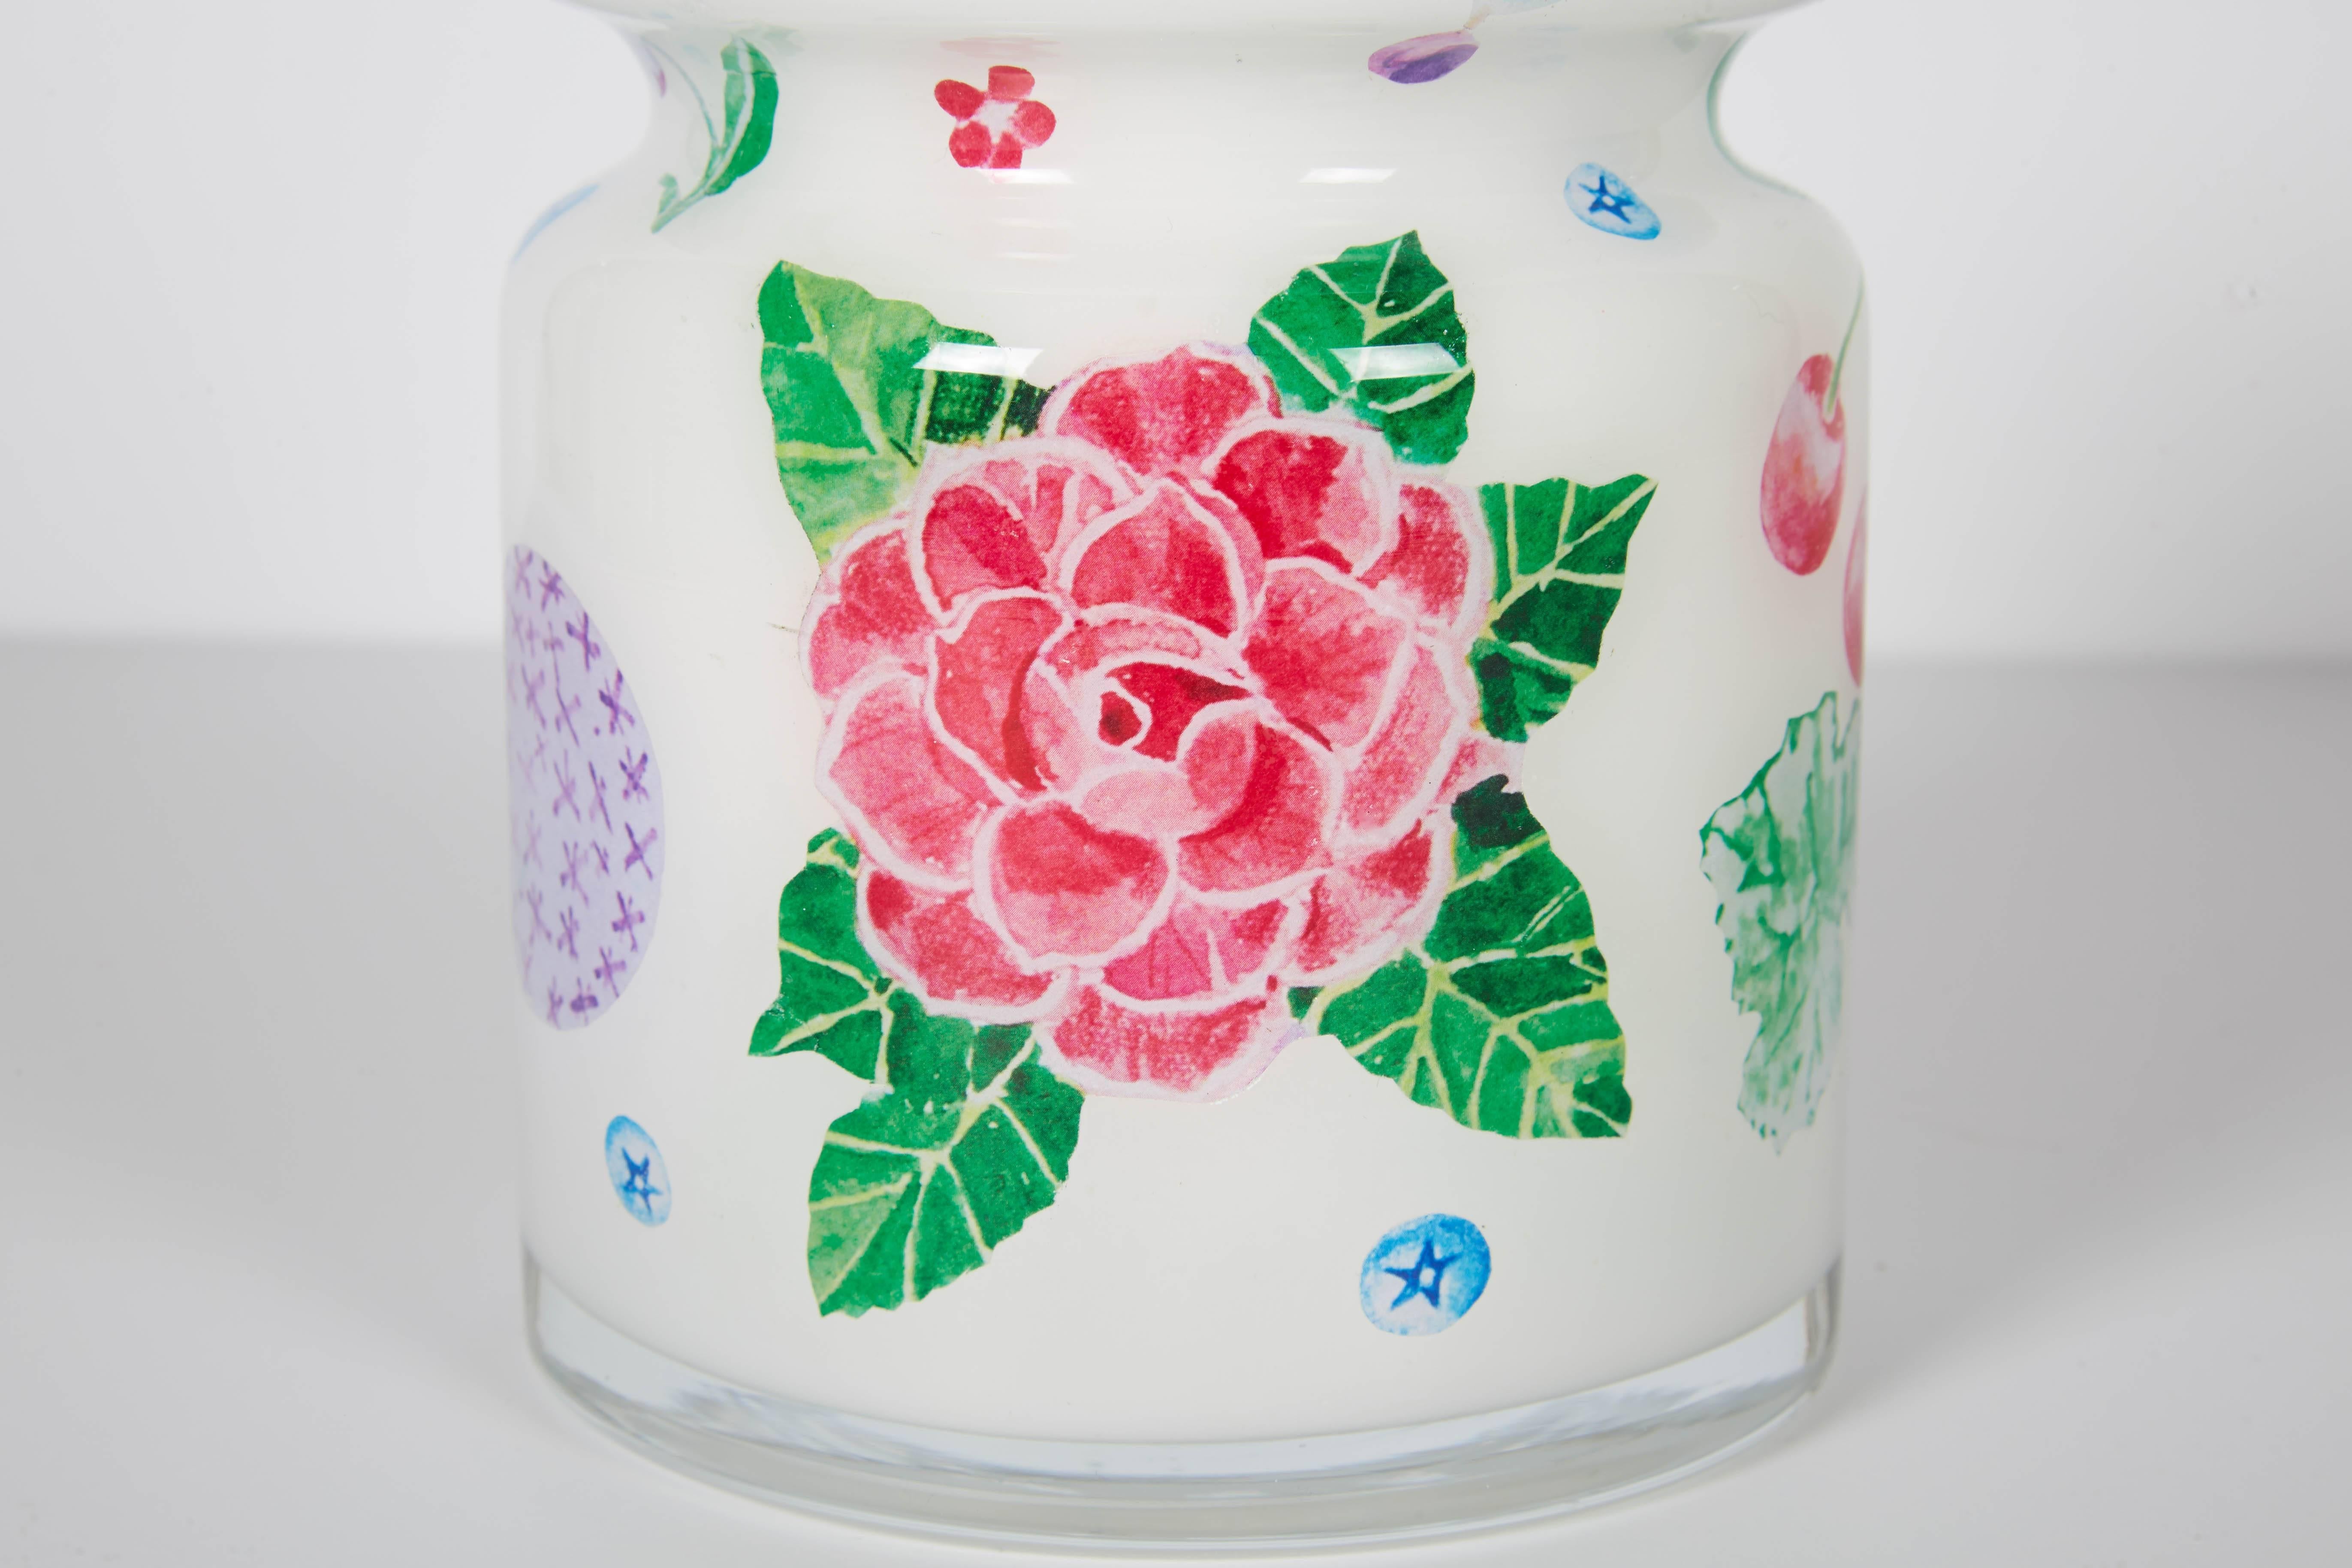 Handmade decoupage floral designed jar with cover, designed by Cathy Graham and crafted by Scott Potter.